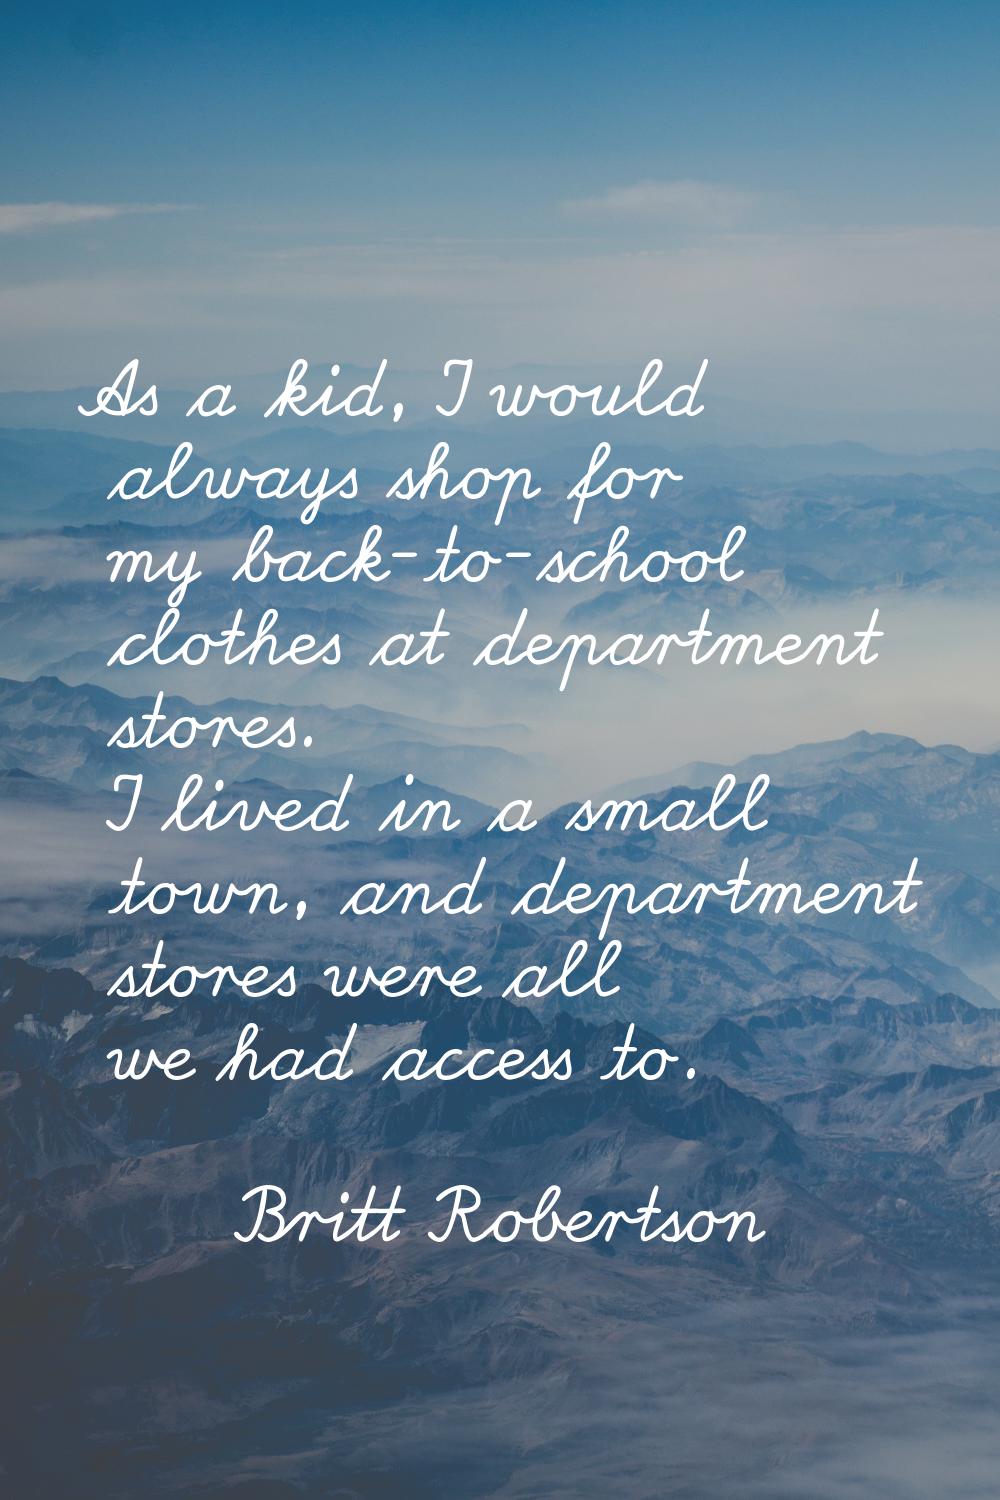 As a kid, I would always shop for my back-to-school clothes at department stores. I lived in a smal